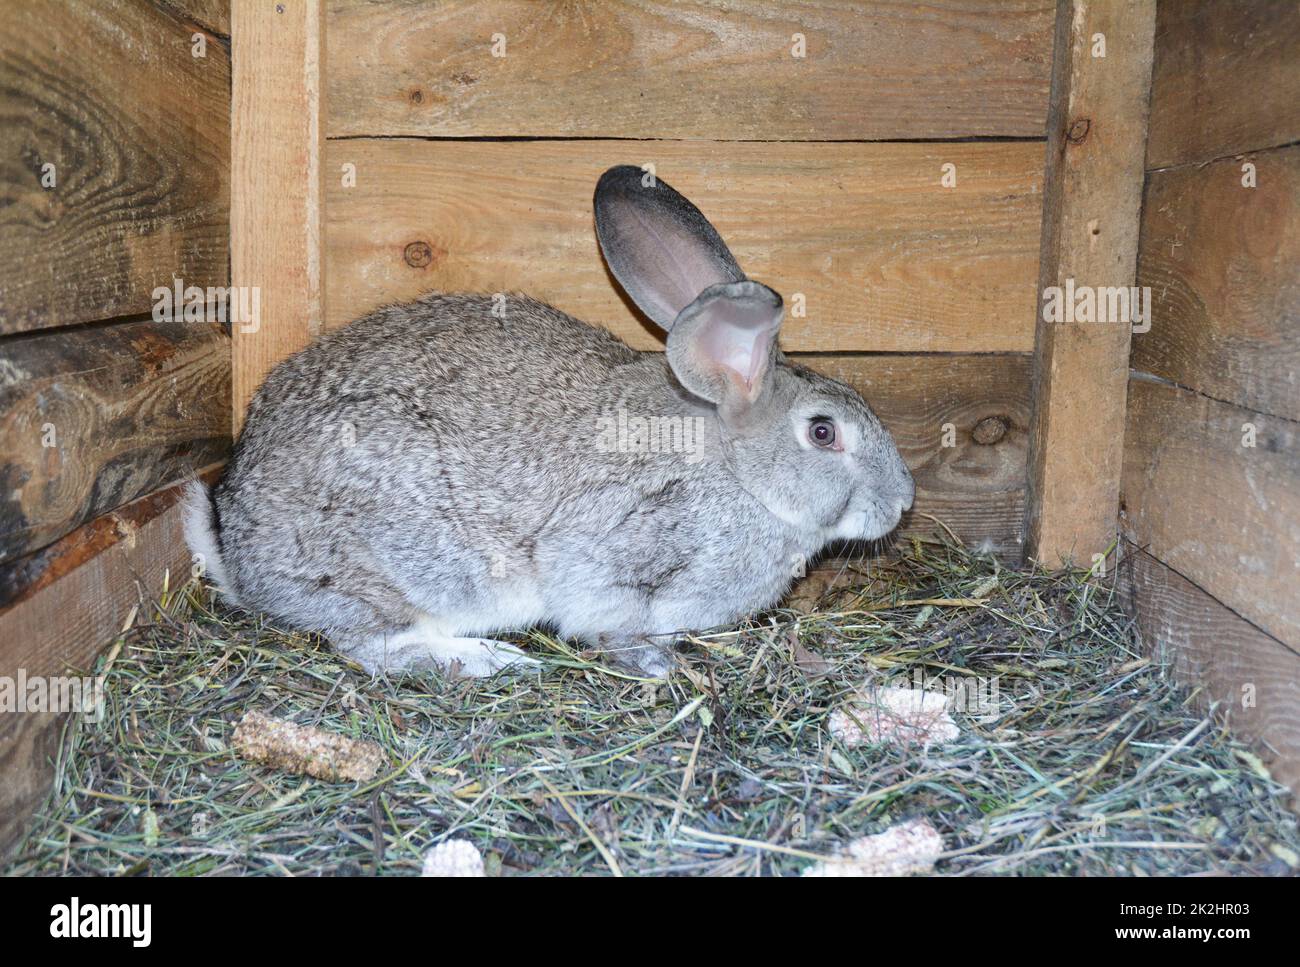 Breeding rabbits at home in wooden rabbit cage. Stock Photo